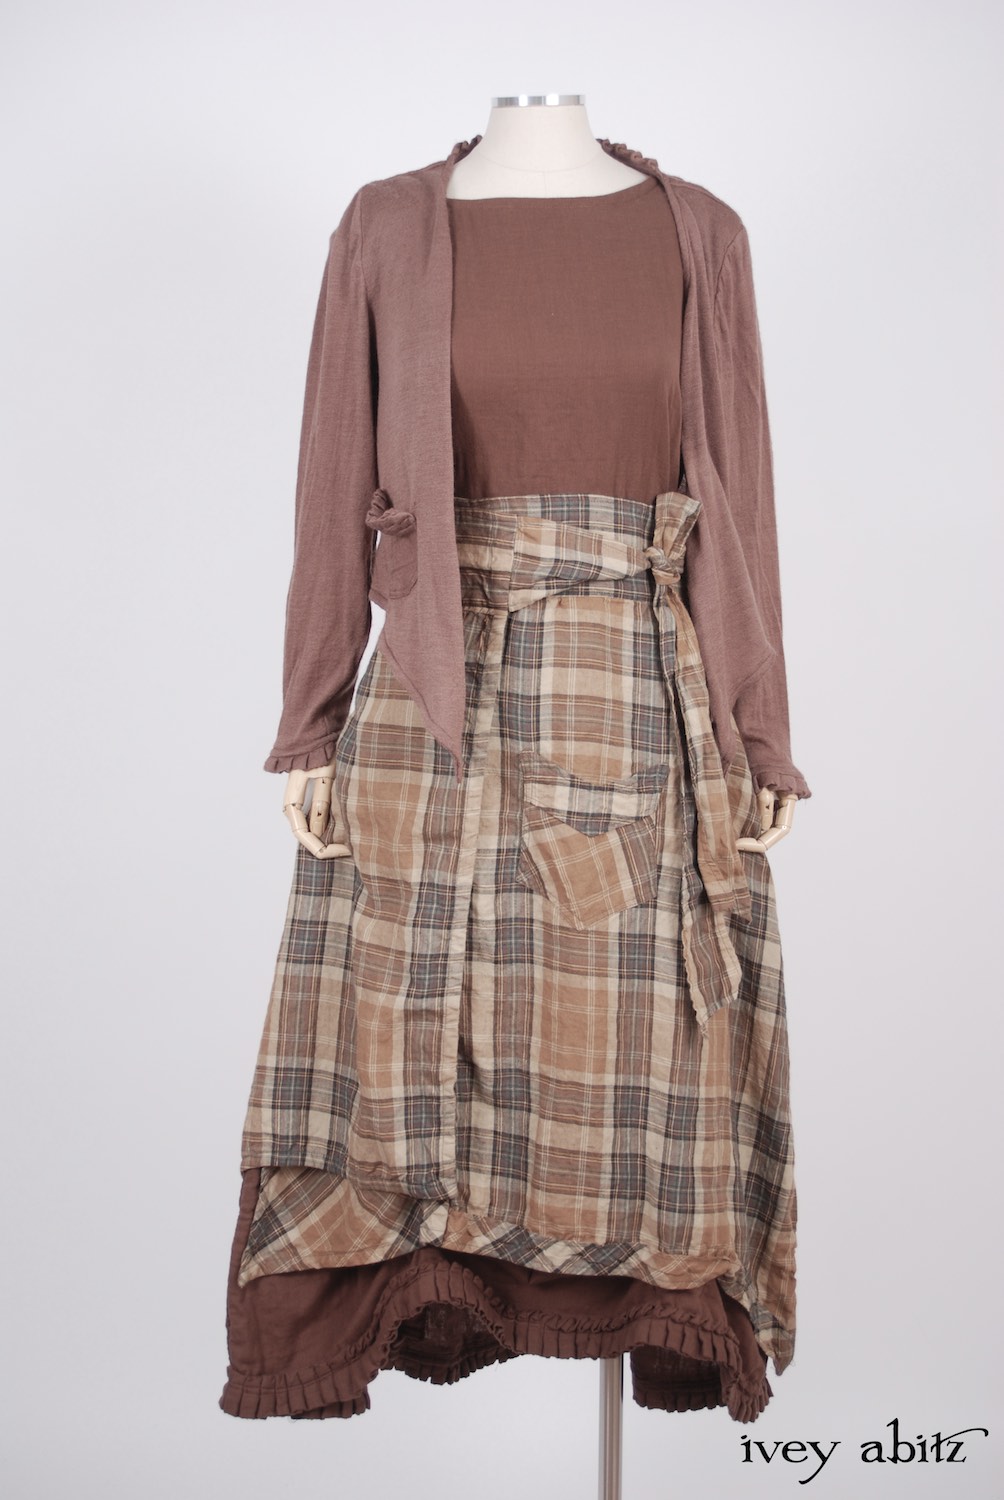 Ivey Abitz - Canterbury Cardigan in Blushed Cashmere Knit  - Highlands Skirt in Eternal Spring Plaid Linen  - Montmorency Frock in Blushed Double Layered Voile, Low Water Length